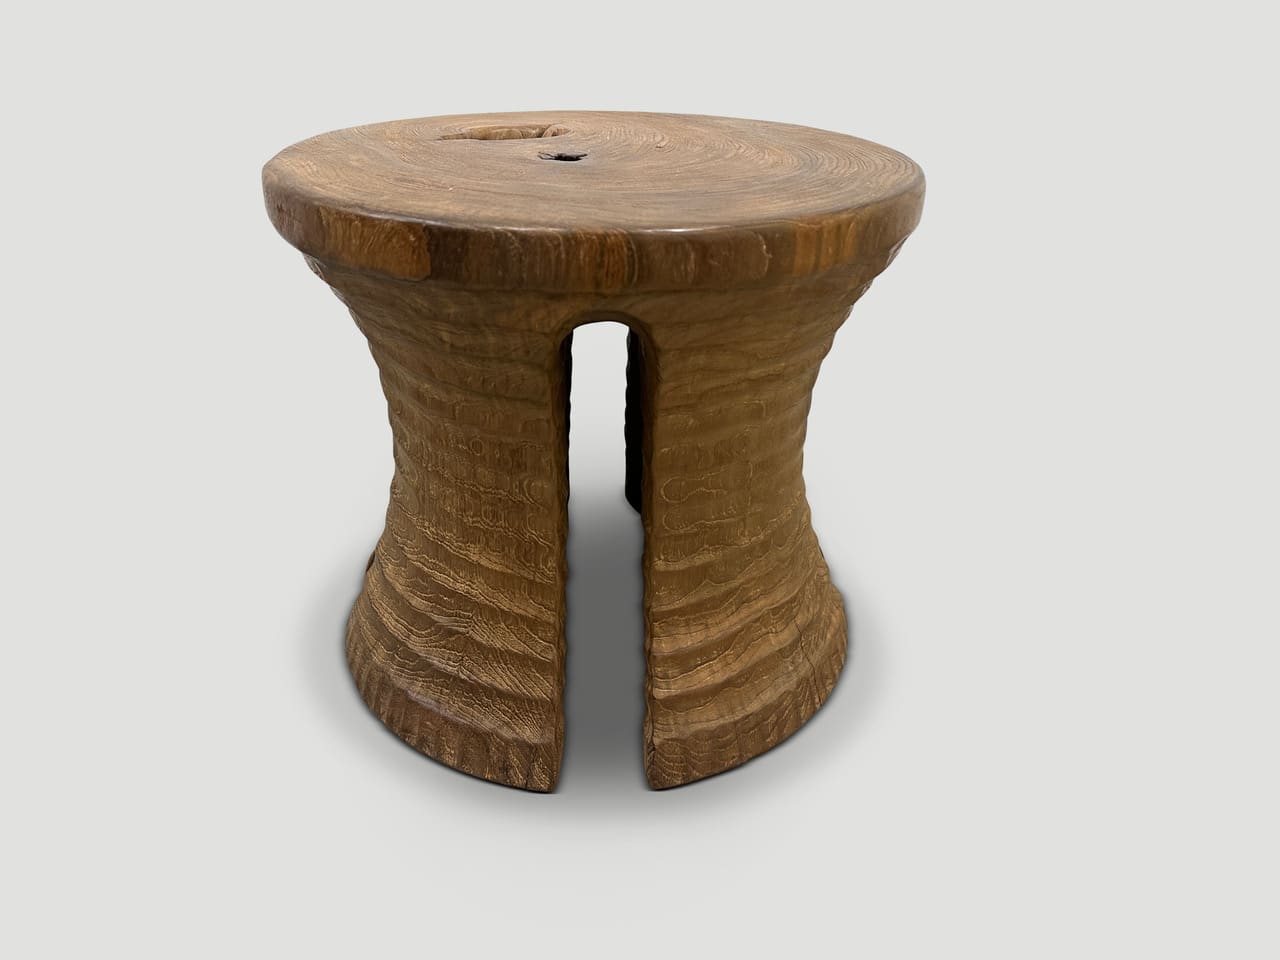 SCULPTURAL SIDE TABLE OR STOOL